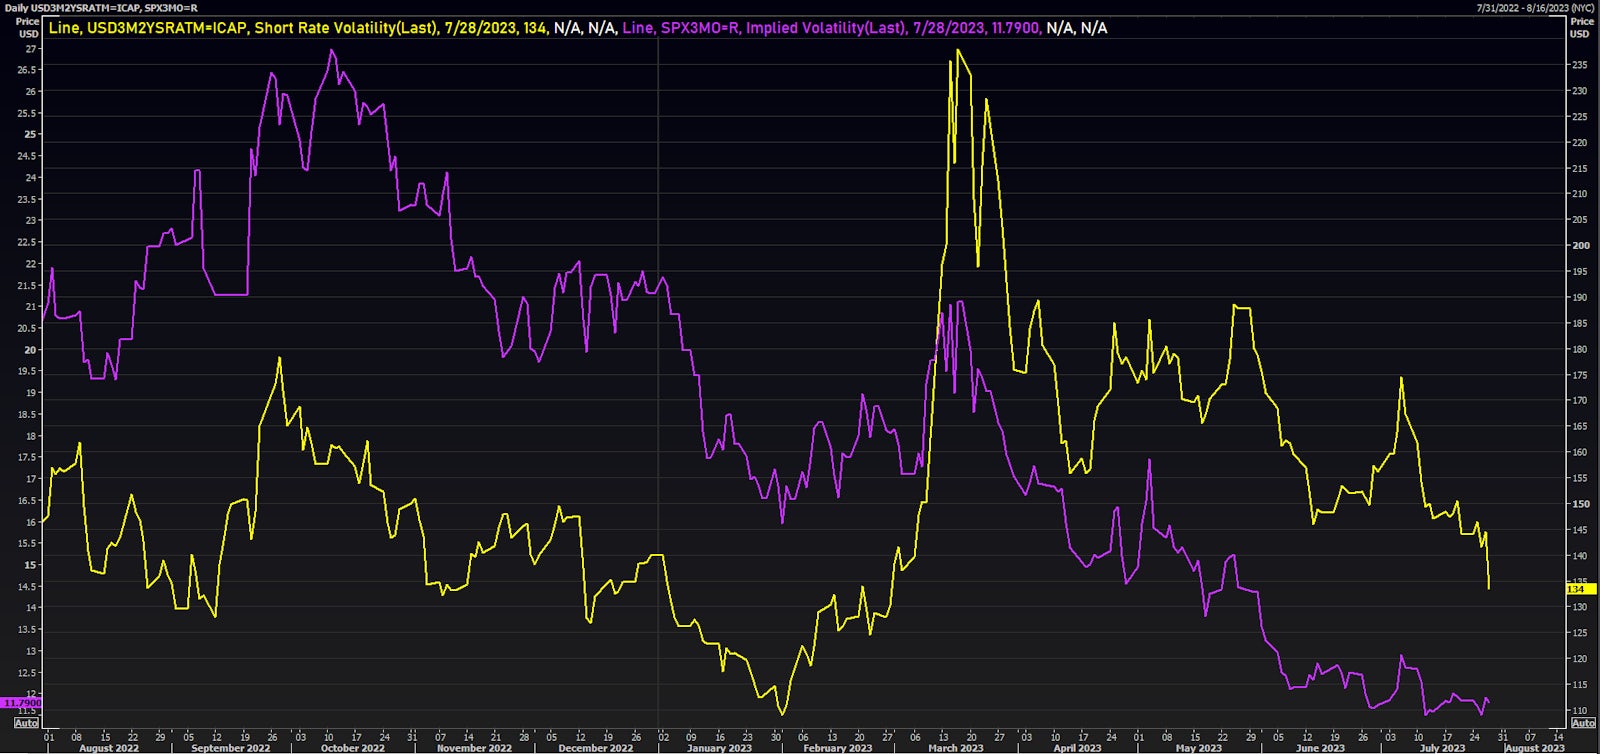 US rates vs equities implied volatility | Source: Refinitiv